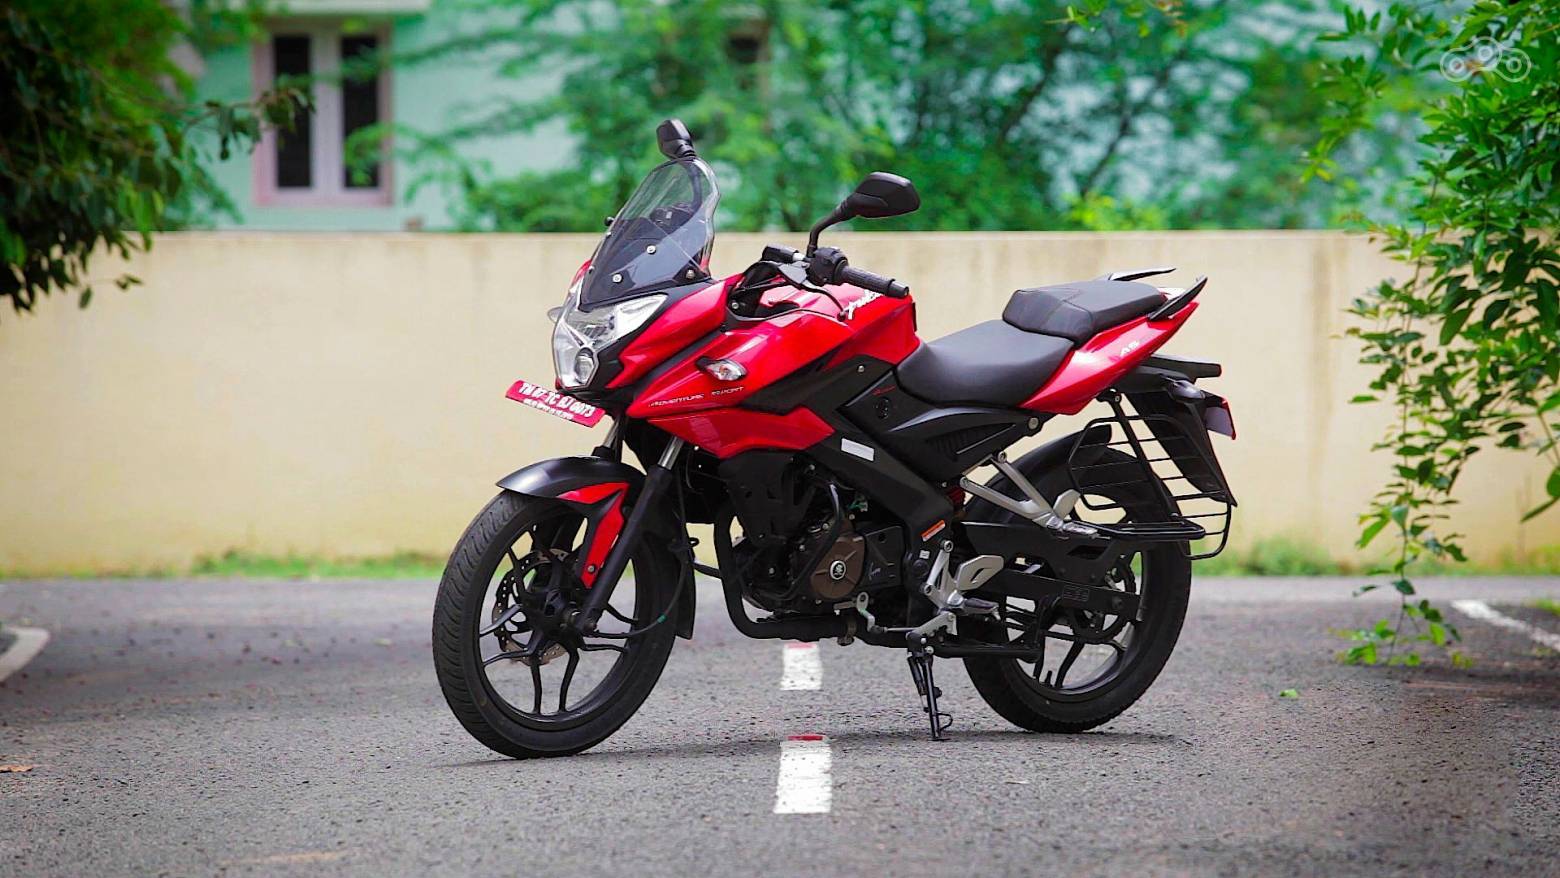 Bajaj pulsar 150ns launch date, price, mileage, specifications, images